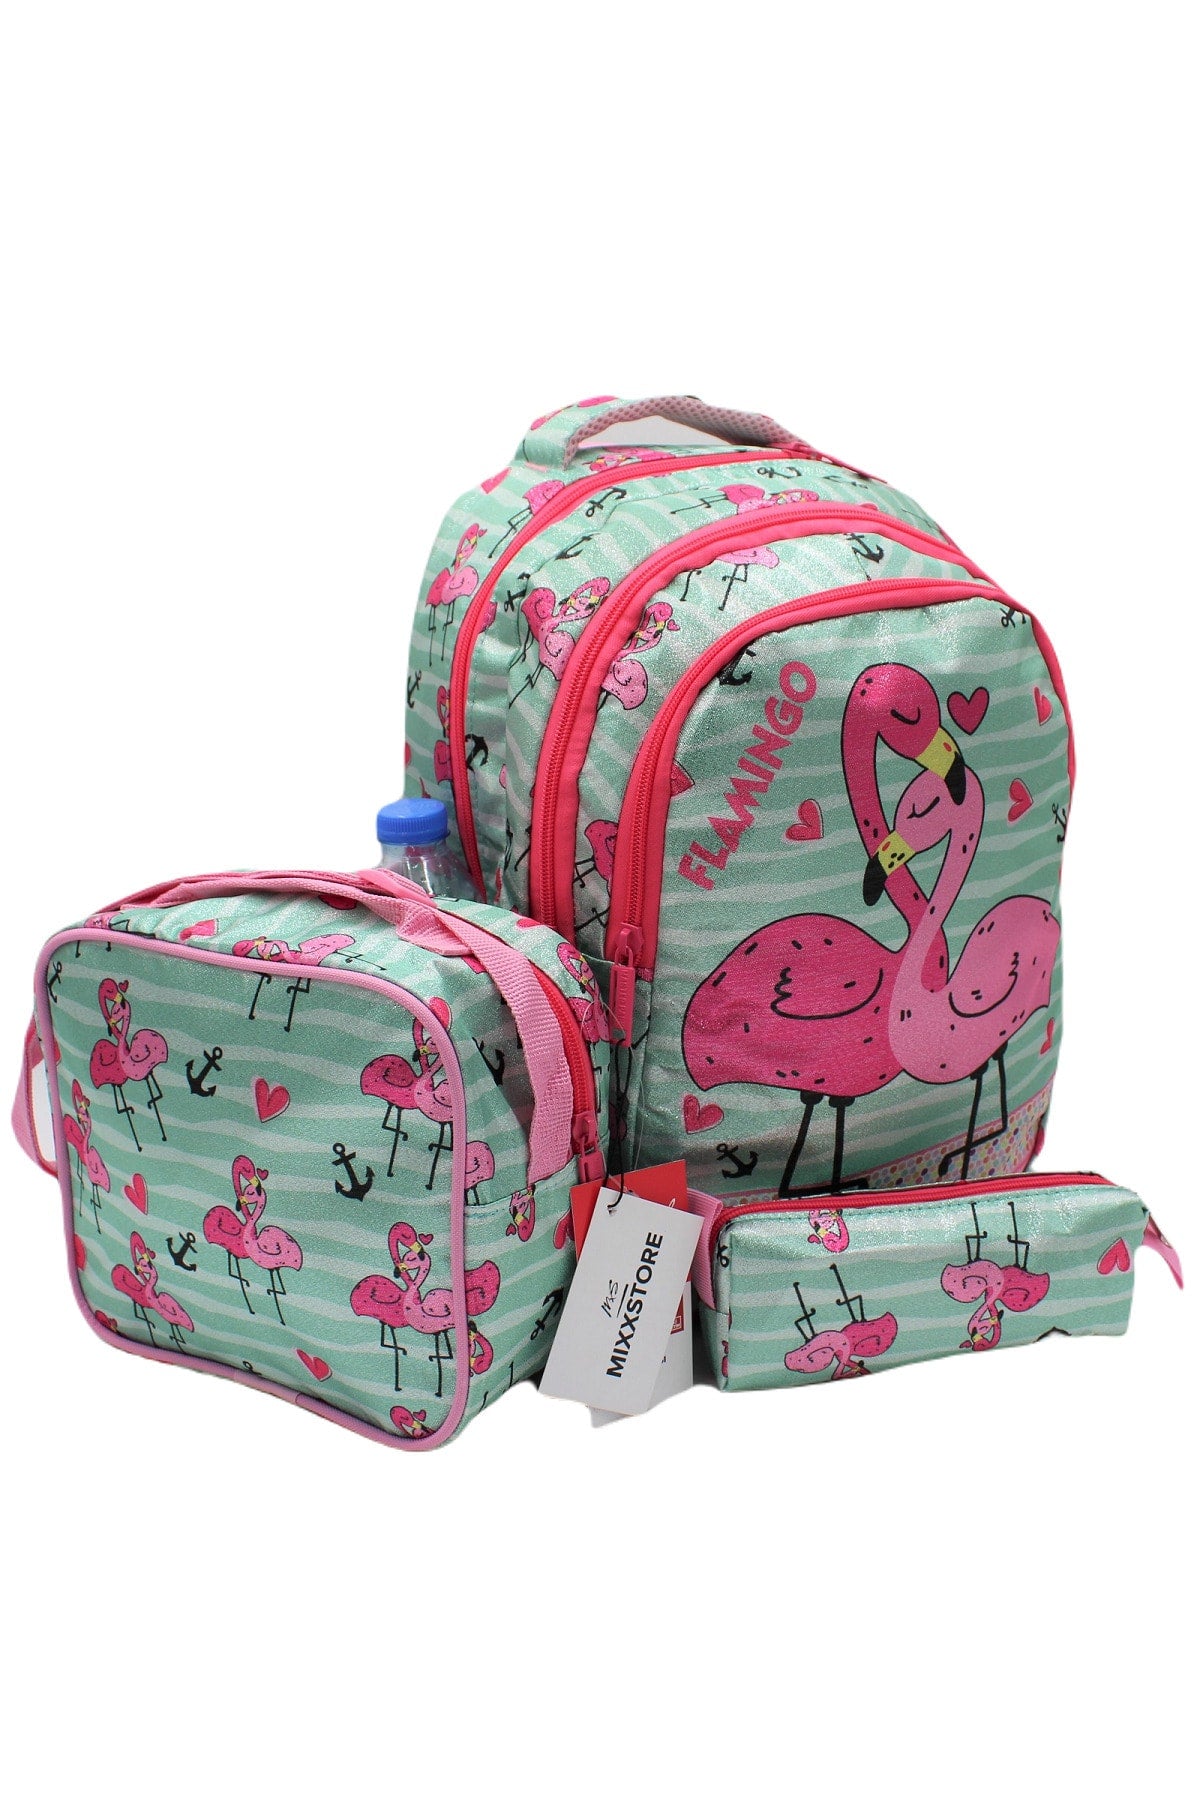 Sim Flamingo Patterned Green Color Backpack Primary School Bag Set for Girls with Food and Pencil Holder